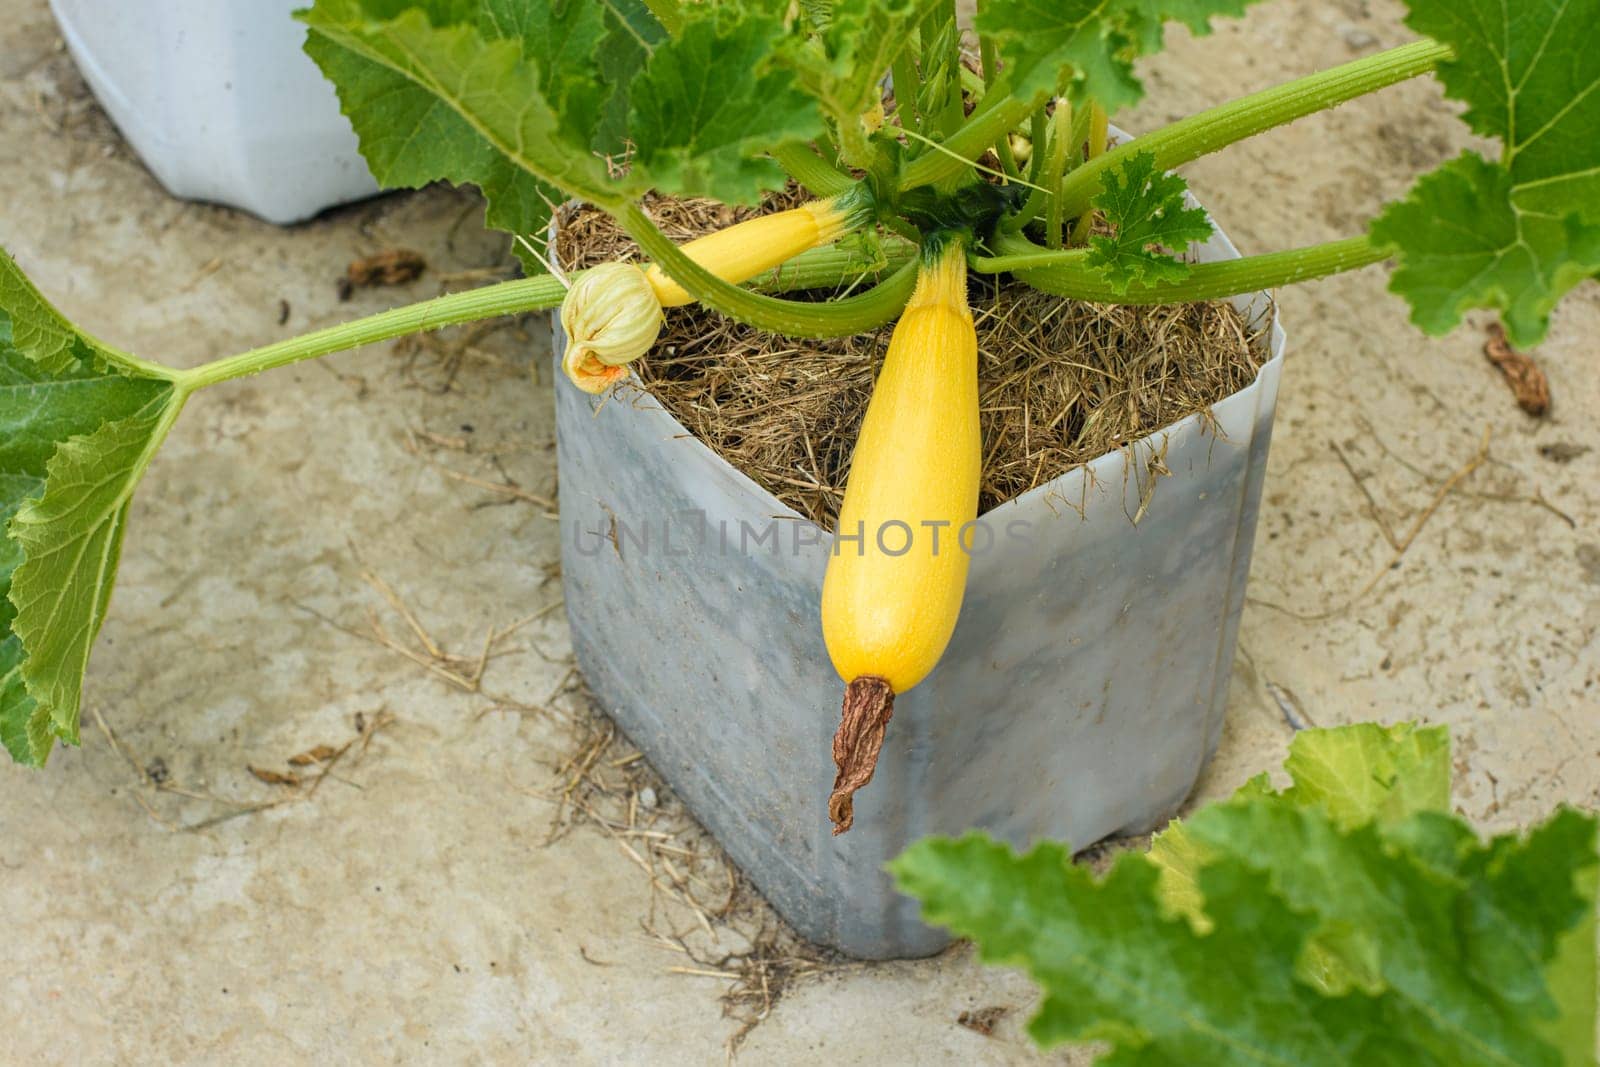 Growing zucchini in plastic pots on concrete